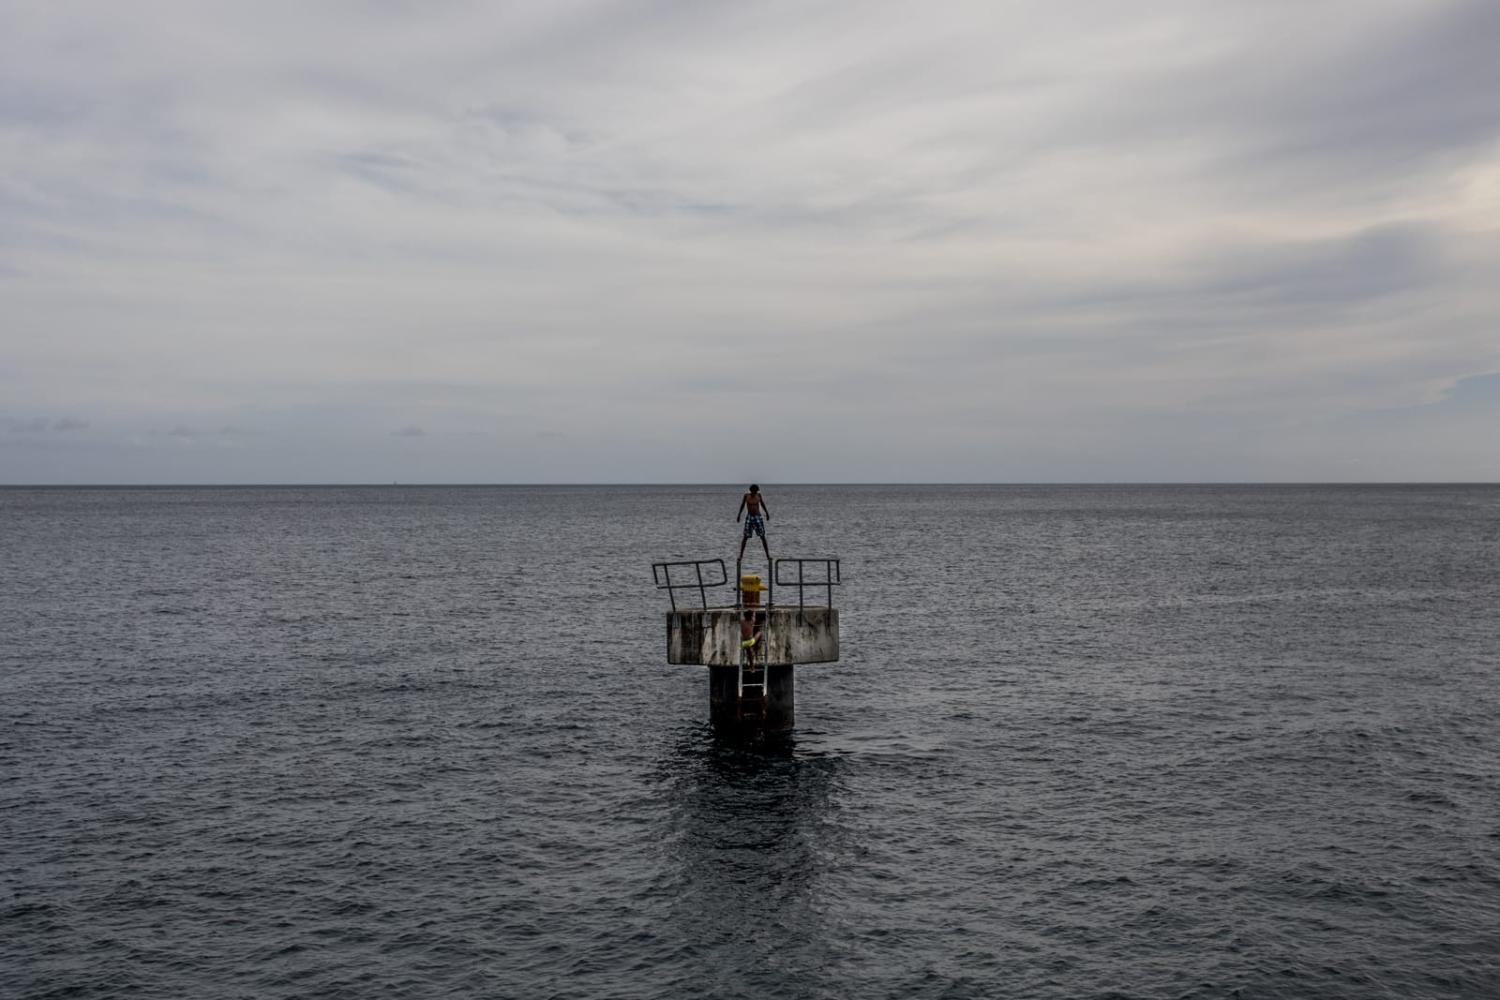 A ship docking structure in Roseau, Dominica: After Hurricane Maria devastated Dominica in 2017, the government pledged to rebuild a world-first “fully climate-resilient” nation (Alejandro Cegarra/Bloomberg via Getty Images)